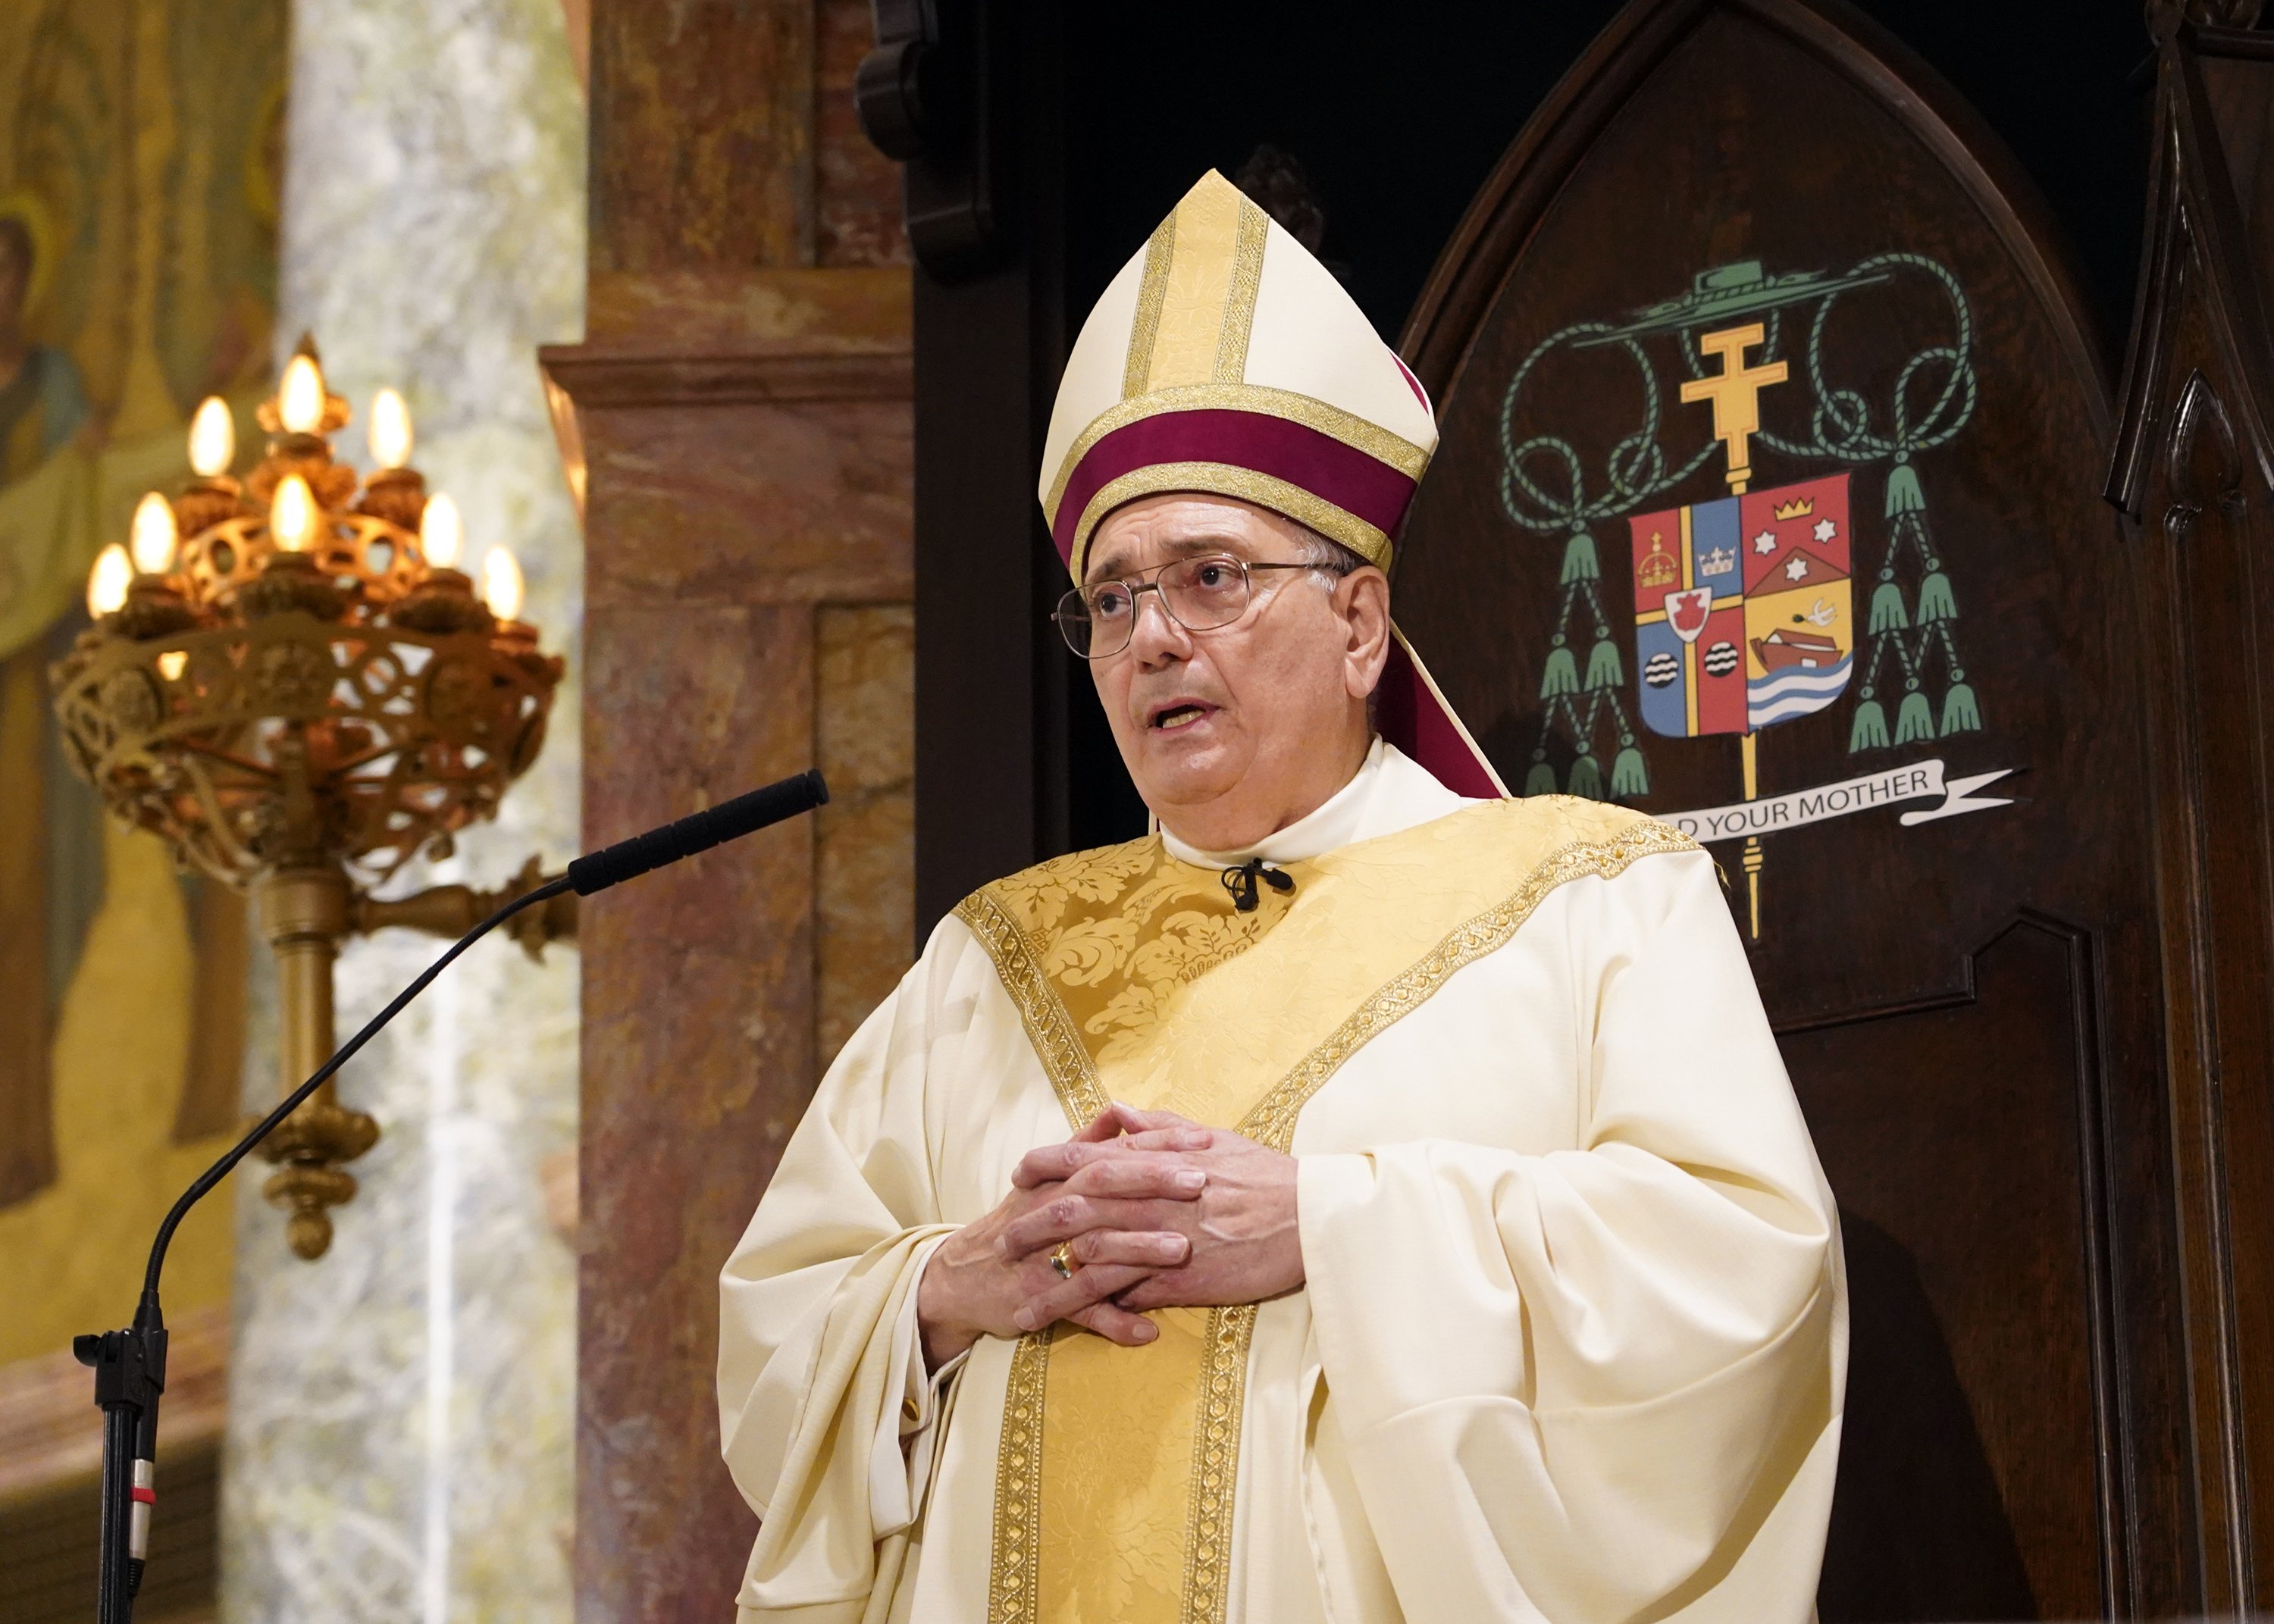 Bishop Nicholas DiMarzio of Brooklyn, N.Y., speaks during a Mass at the Co-Cathedral in Brooklyn June 5, 2021, during which he ordained four men to the priesthood. (CNS photo/Gregory A. Shemitz)